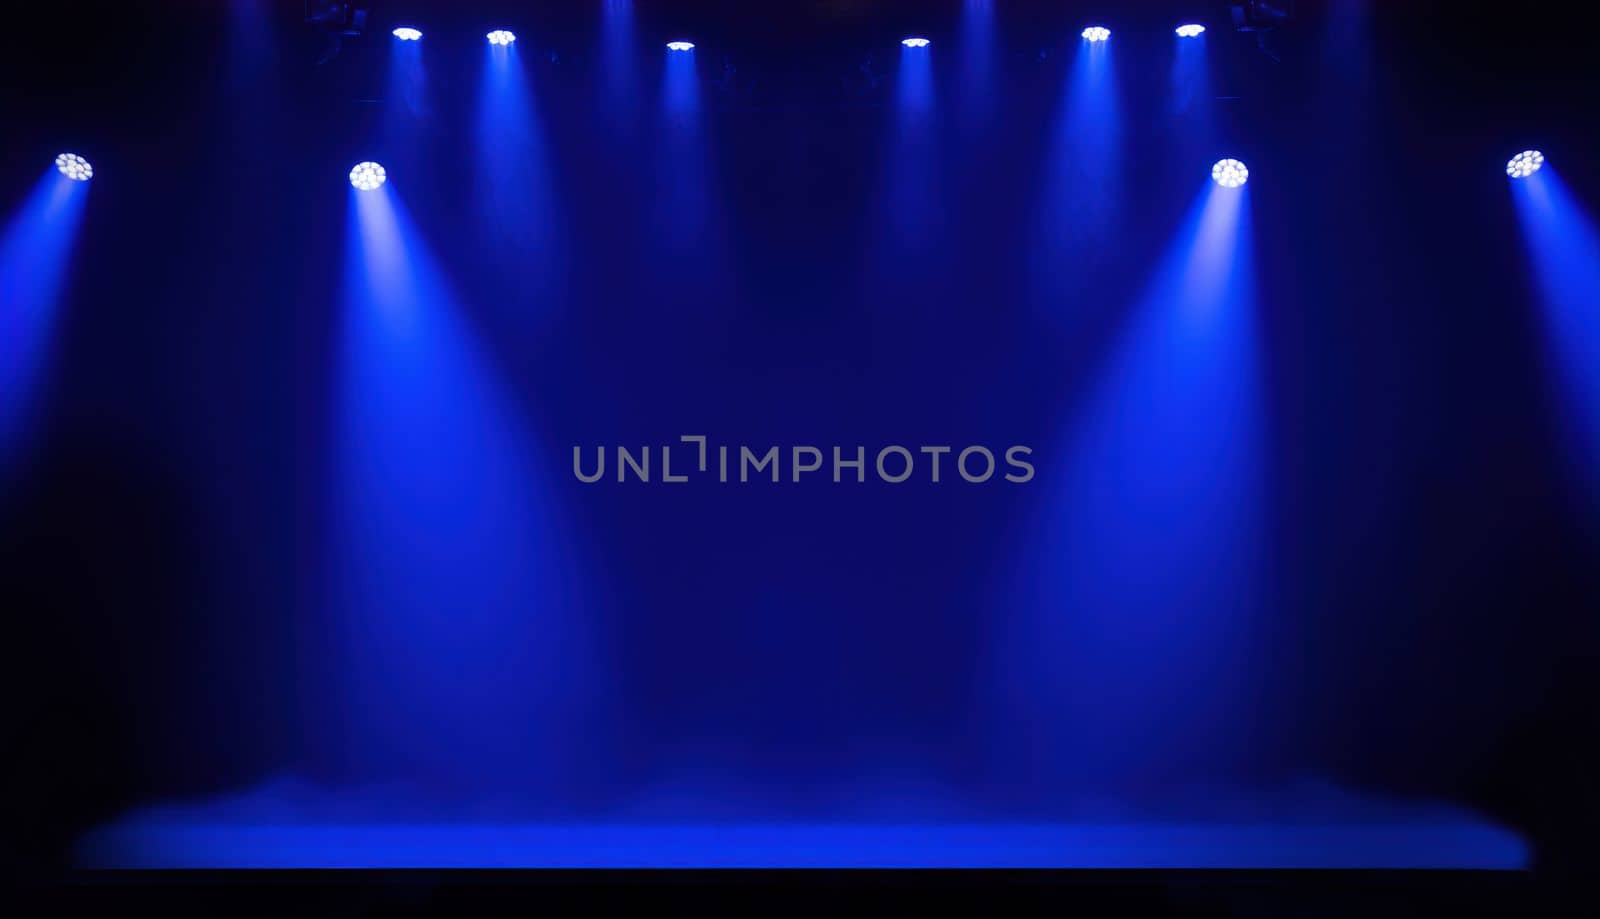 Light on a free stage, scene with blue spotlights by GekaSkr